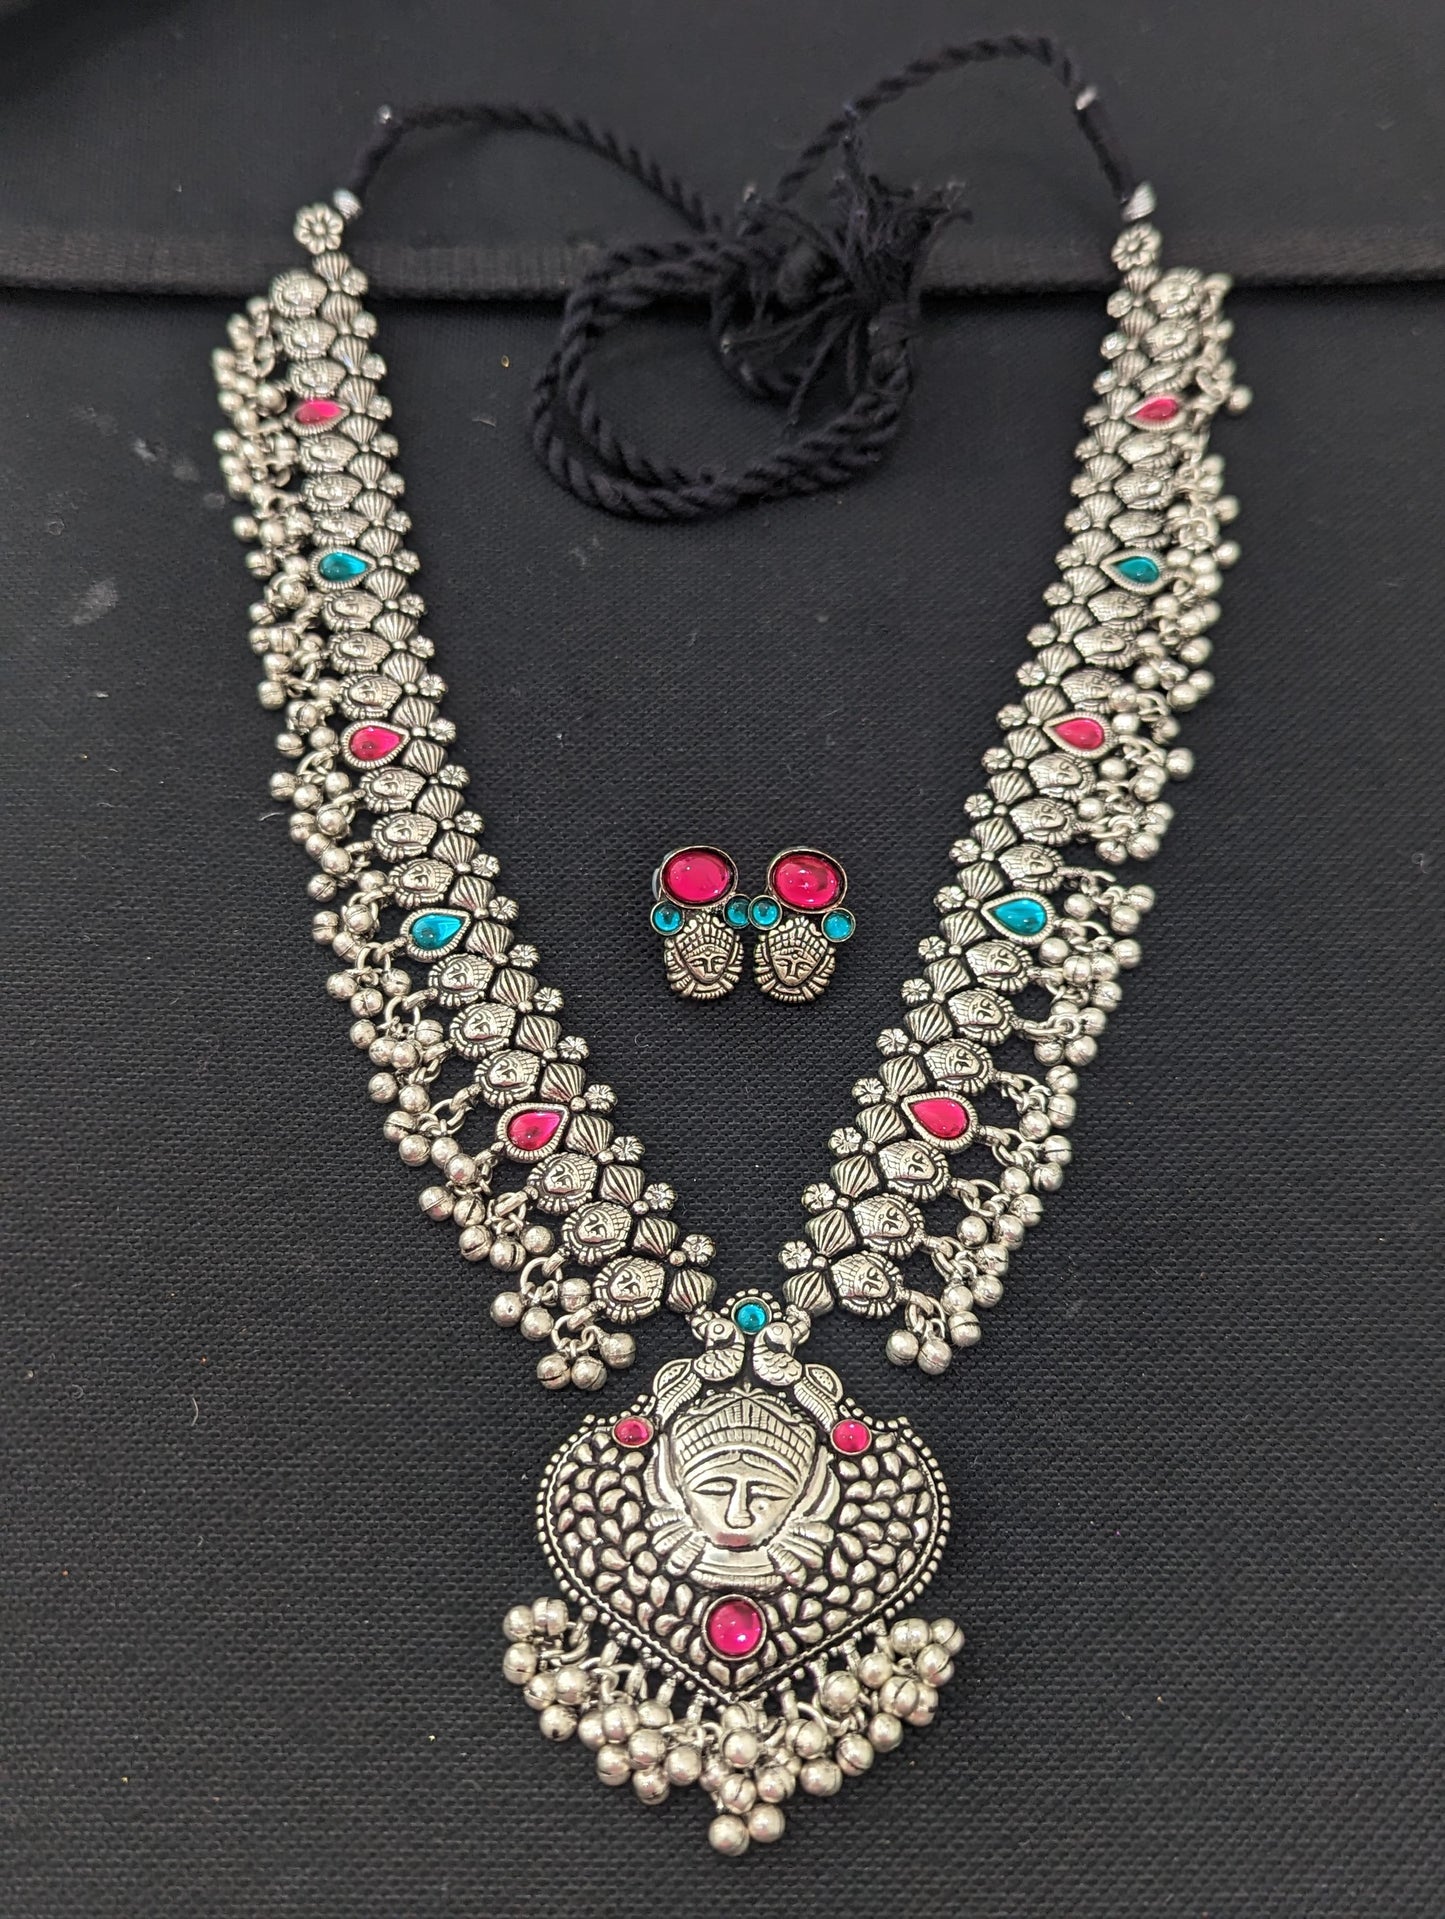 Oxidized Silver Durga Maa Long Haram Necklace and Stud Earrings Set